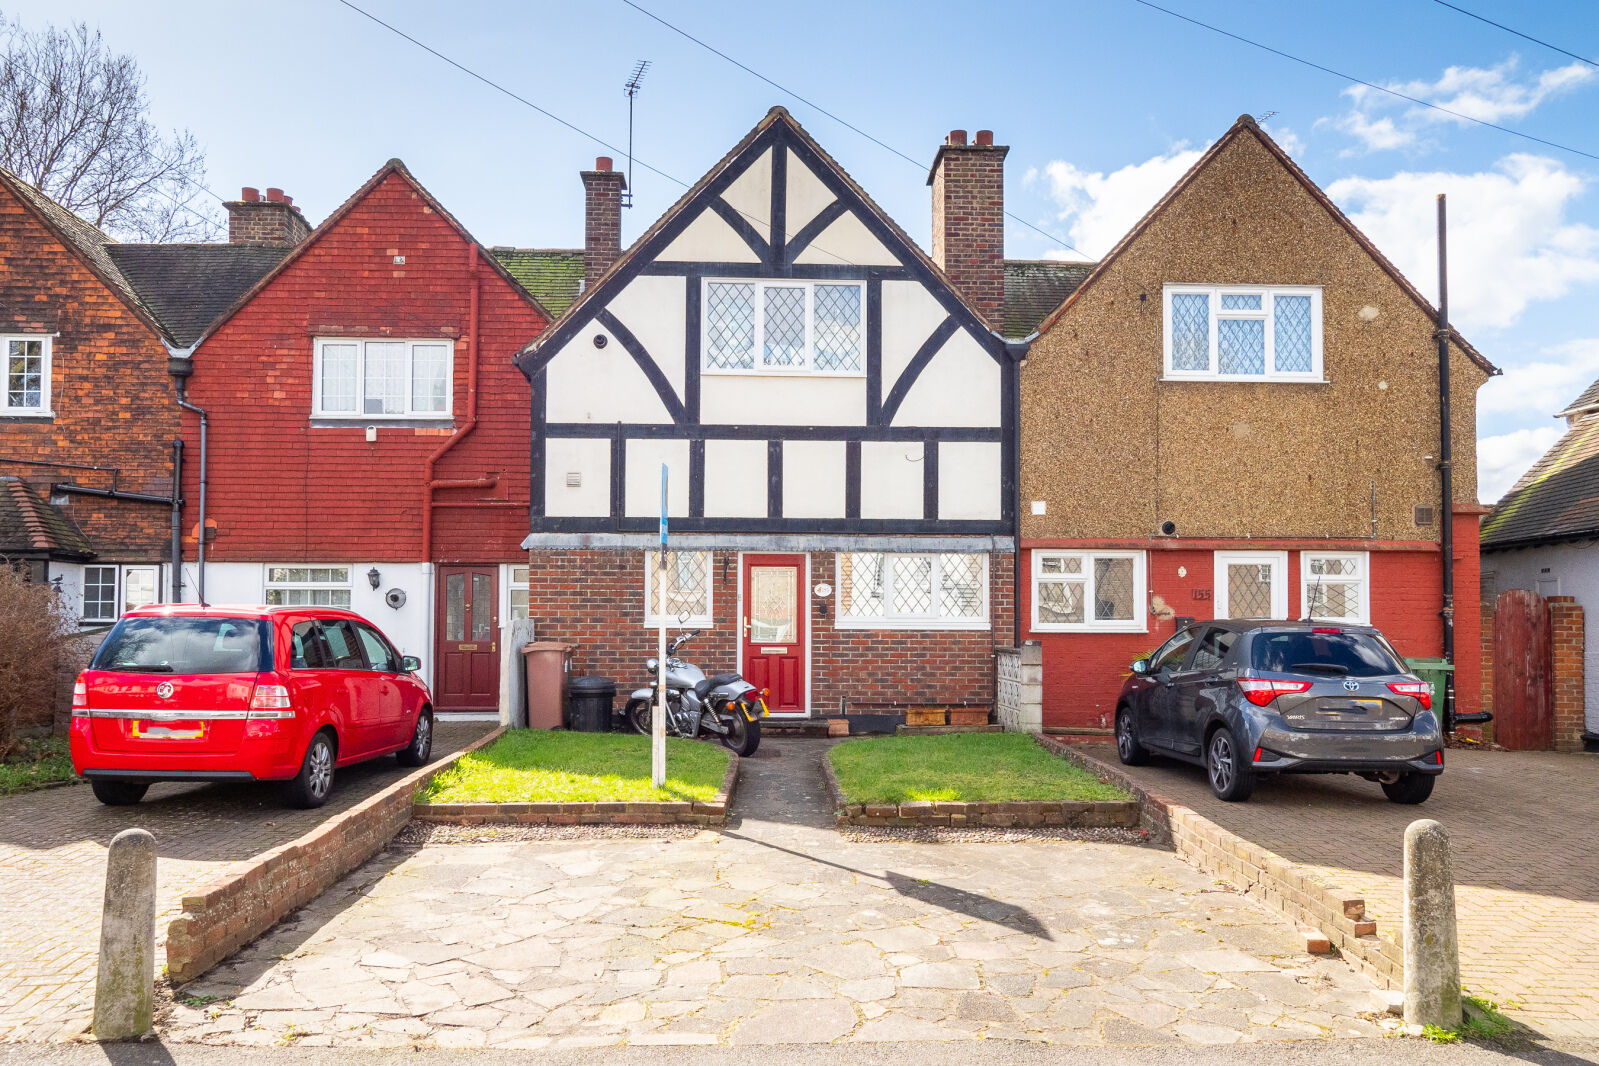 3 bedroom mid terraced house for sale Collingwood Road, Sutton, SM1, main image